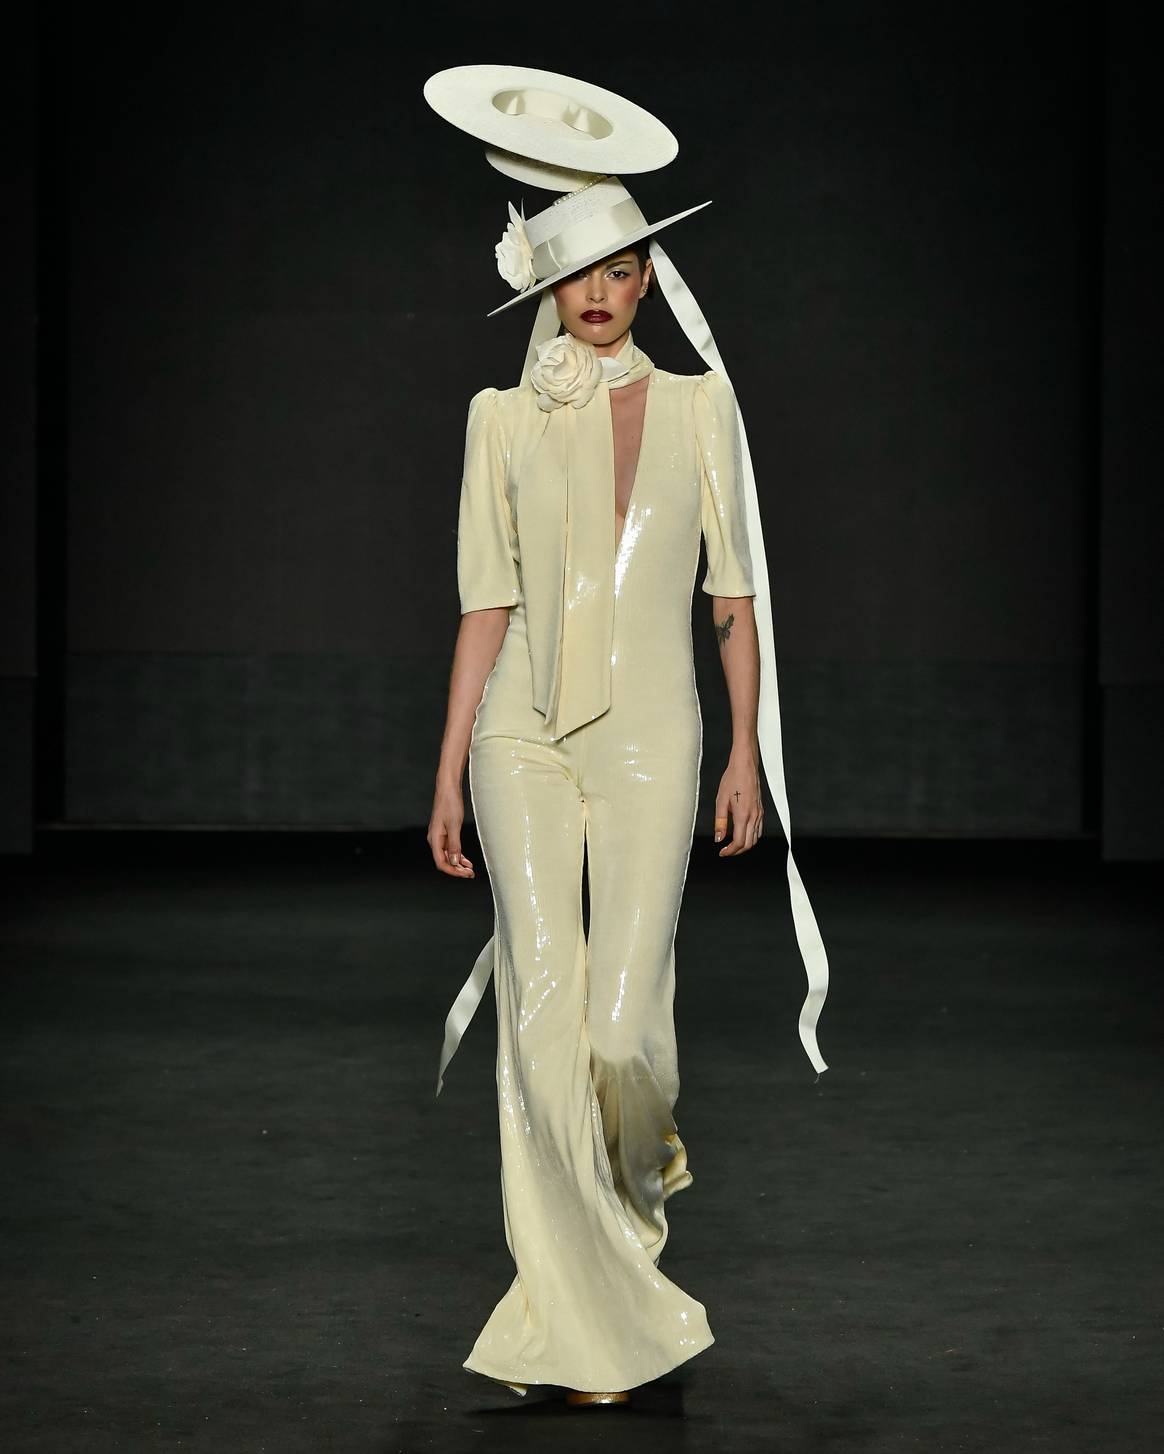 SPFW SS24 or fashion as a reflection of contemporary issues